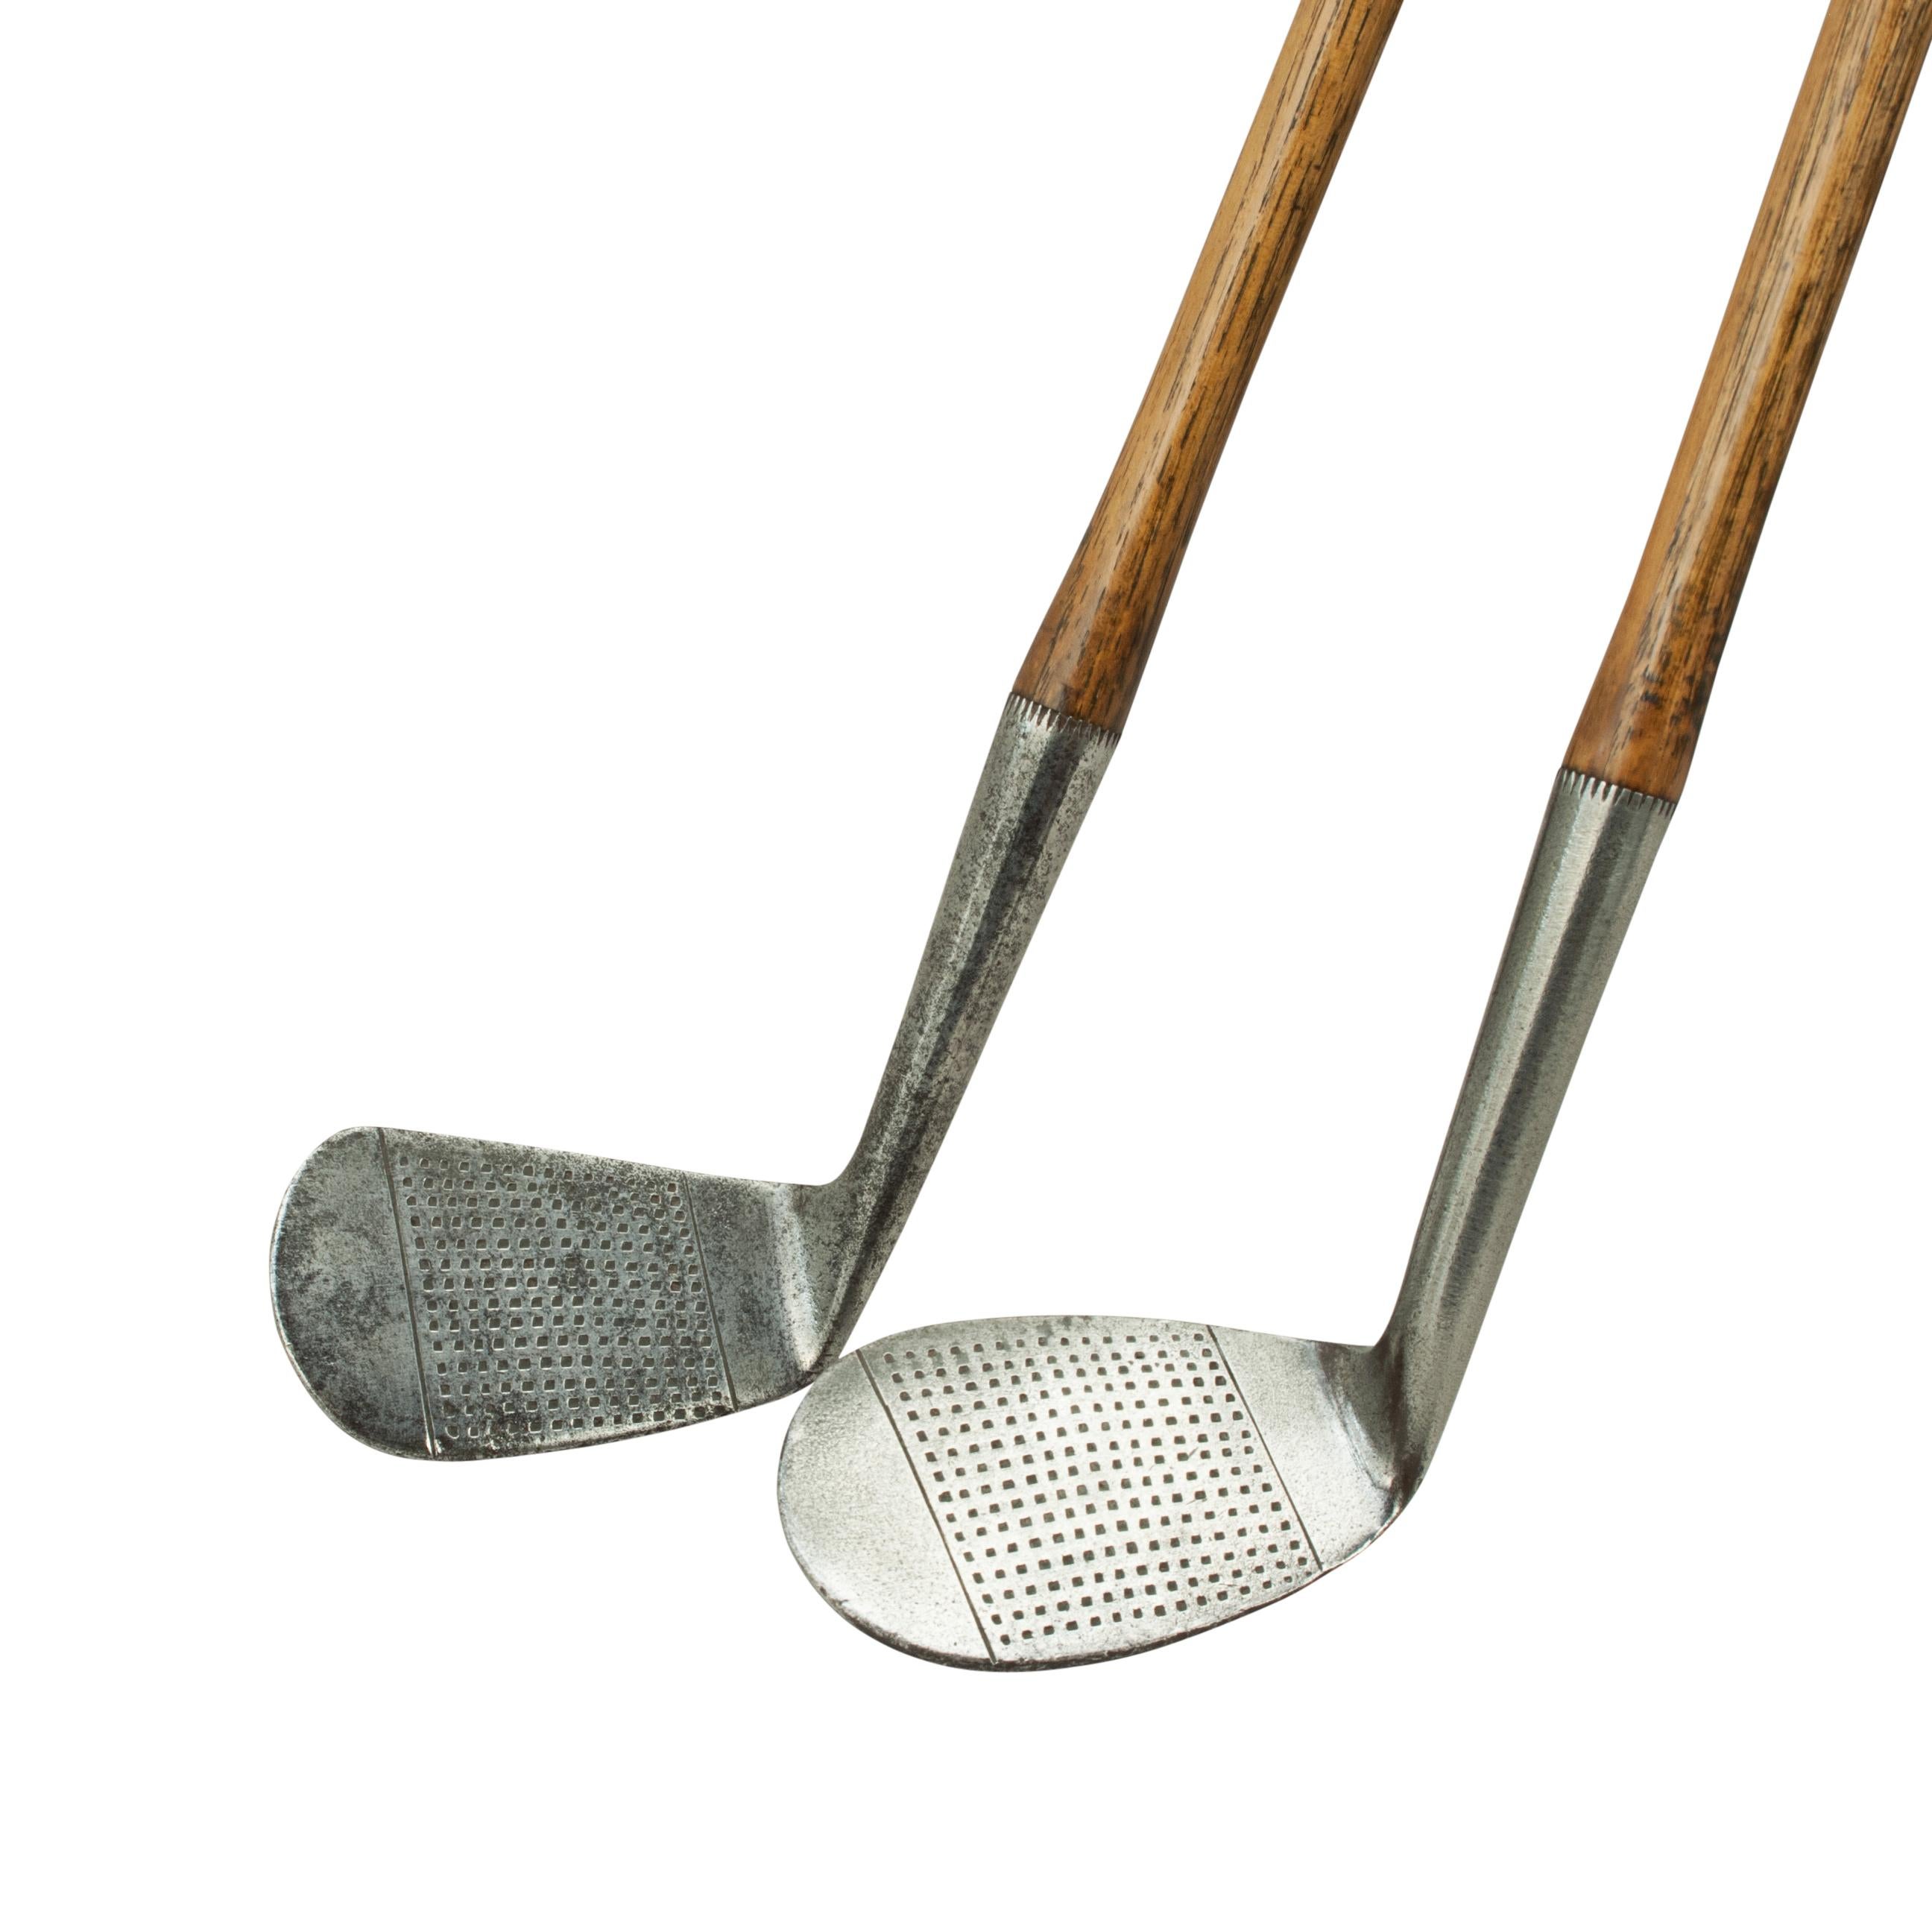 Pair of Hickory Golf Clubs, J.H. Taylor Autograph Irons. 
A pair of J.H. Taylor hickory shafted golf clubs, a Mashie and Niblick. The club heads stamped 'Cann & Taylor, Warranted Hand Forged, with J. H.Taylor 'Autograph' with the Reg. No.